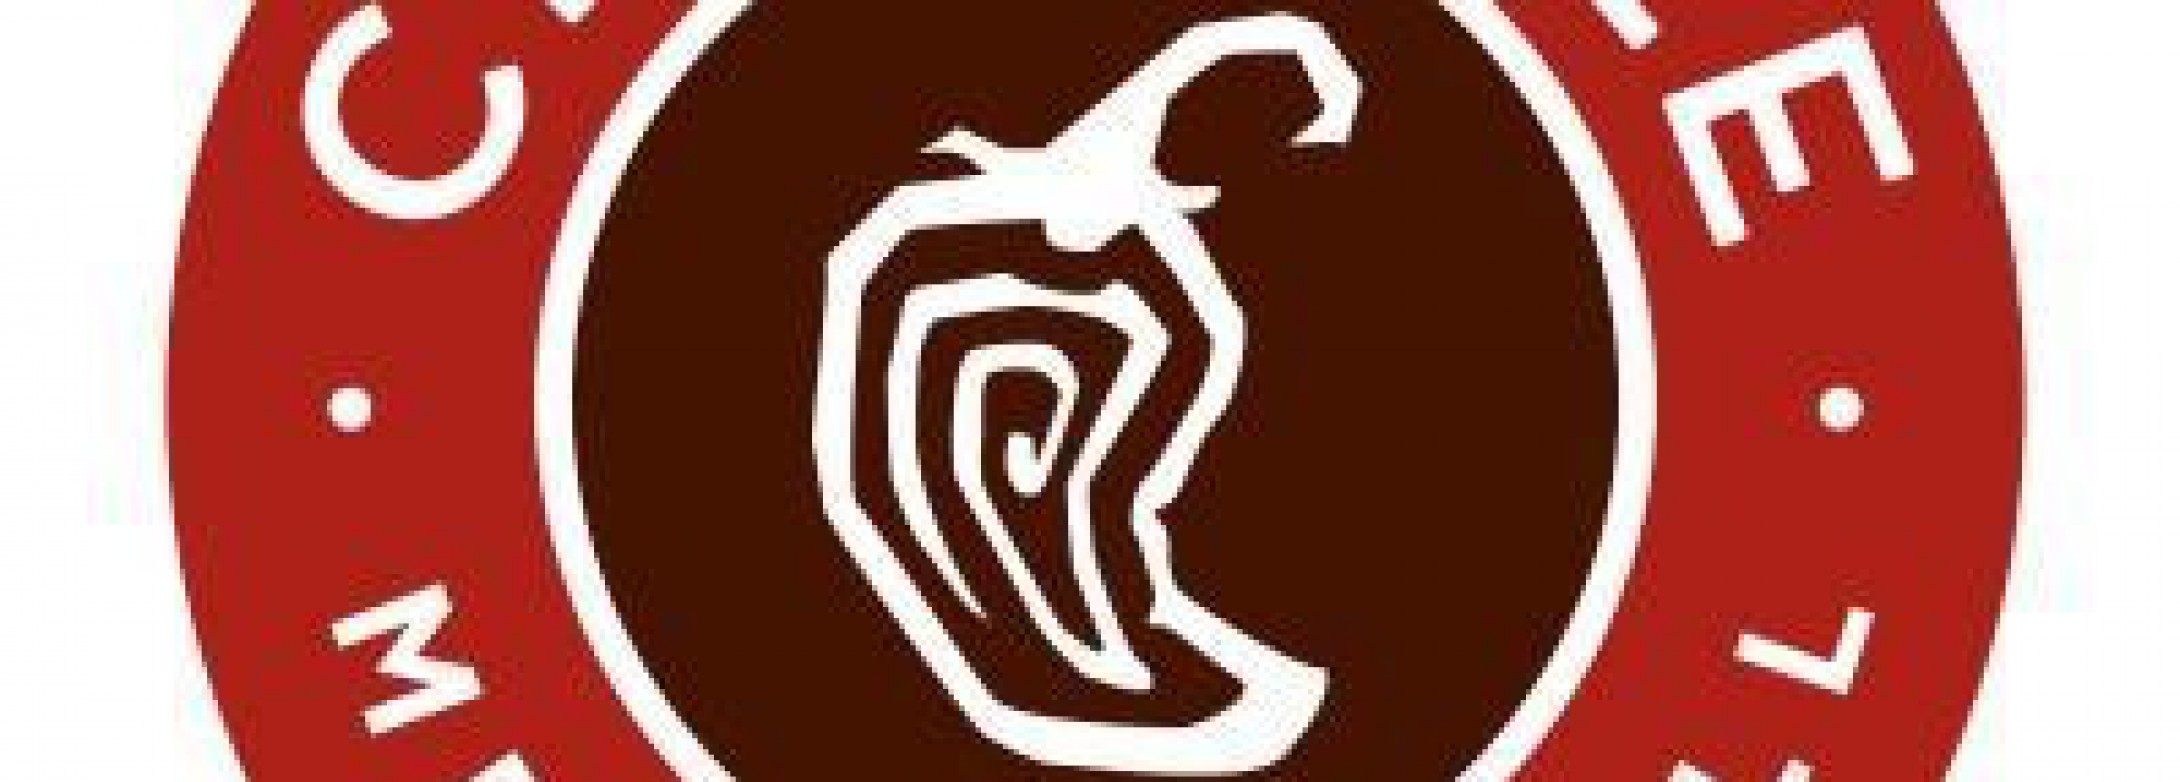 Chipotle Mexican Grill – A Strategic Communications Survival Strategy